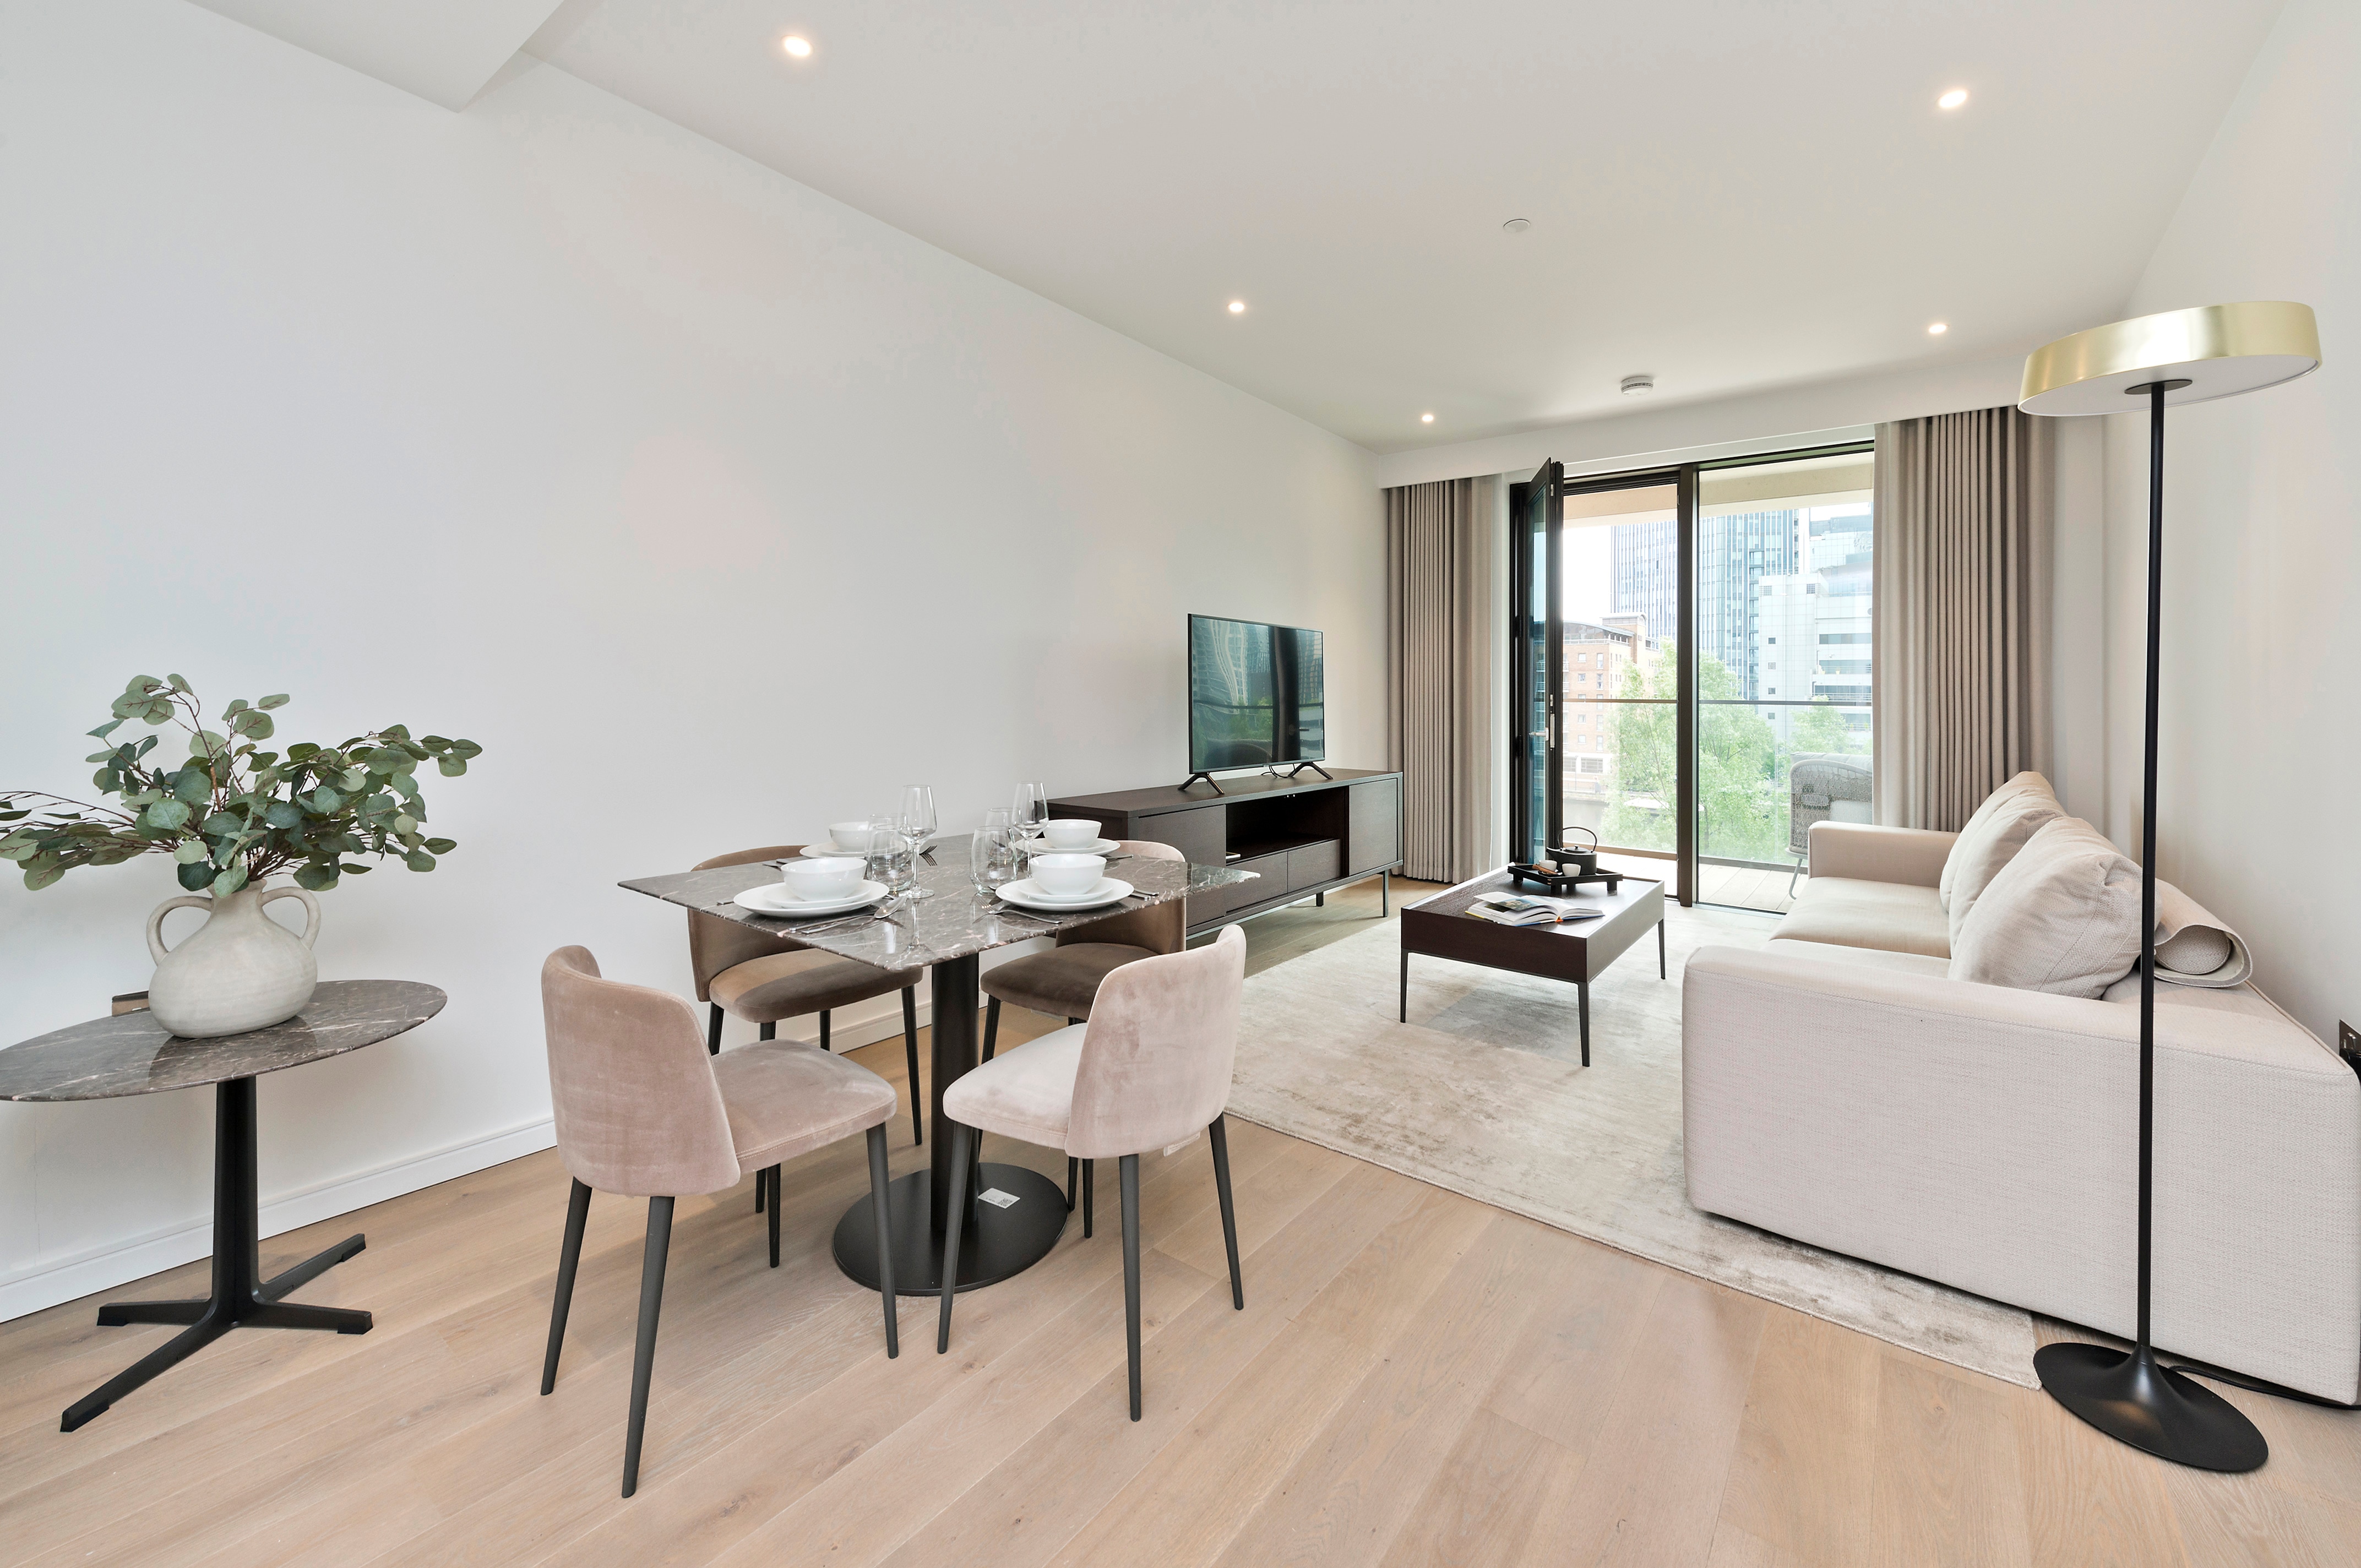 Property Image 1 - Deluxe one bedroom apartment in Canary Wharf